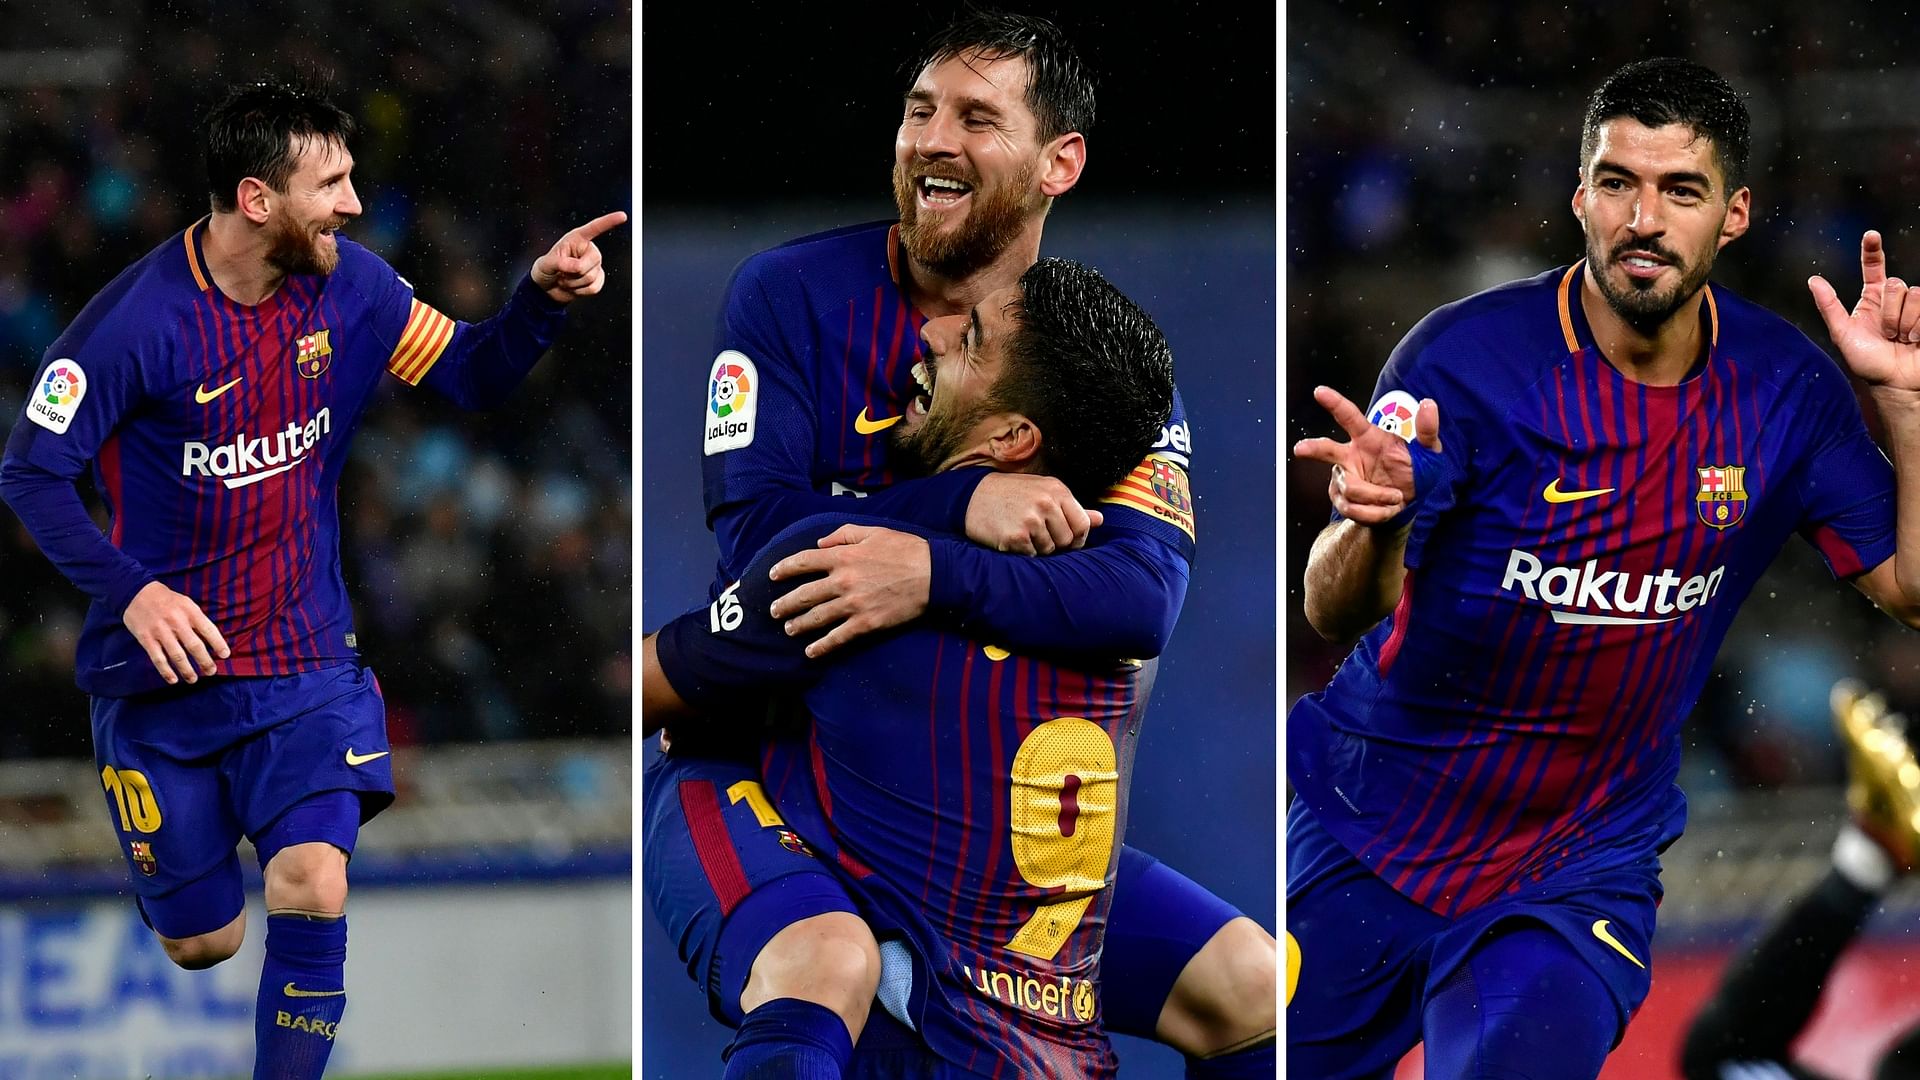 Luis Suarez scored twice before Lionel Messi completed Barcelona’s 4-2 comeback win at Real Sociedad.